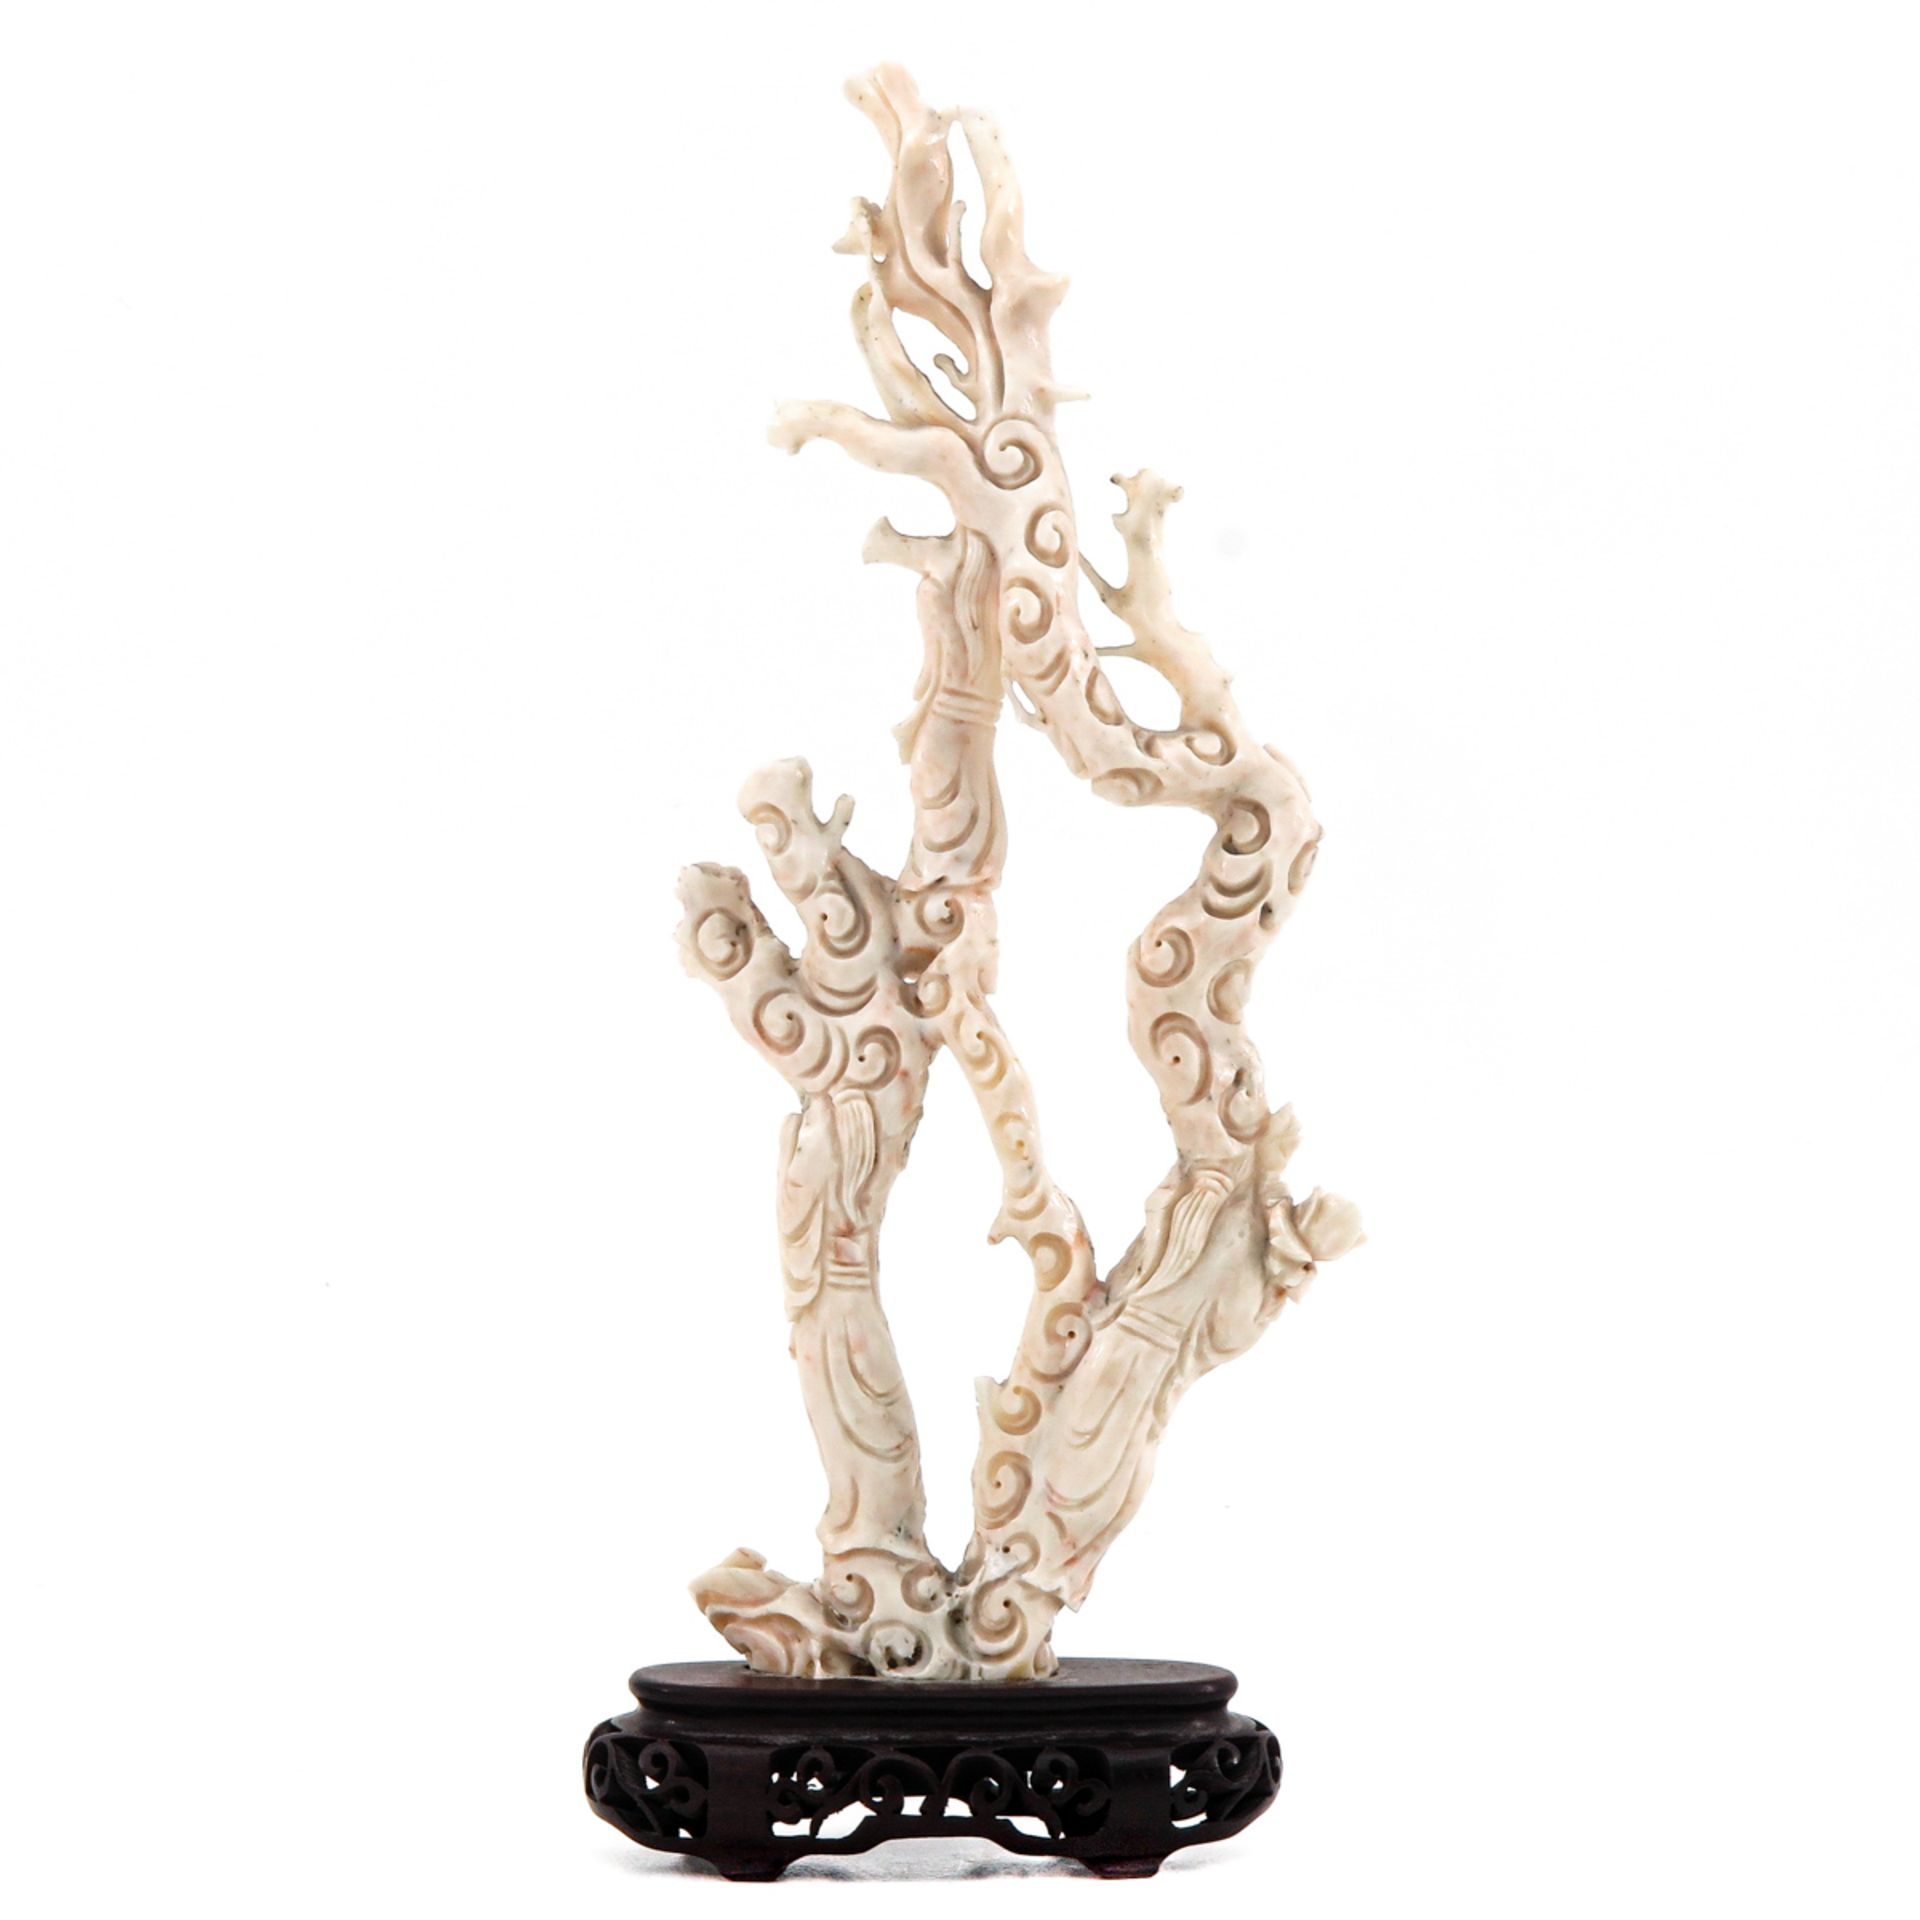 A White Coral Sculpture - Image 3 of 10